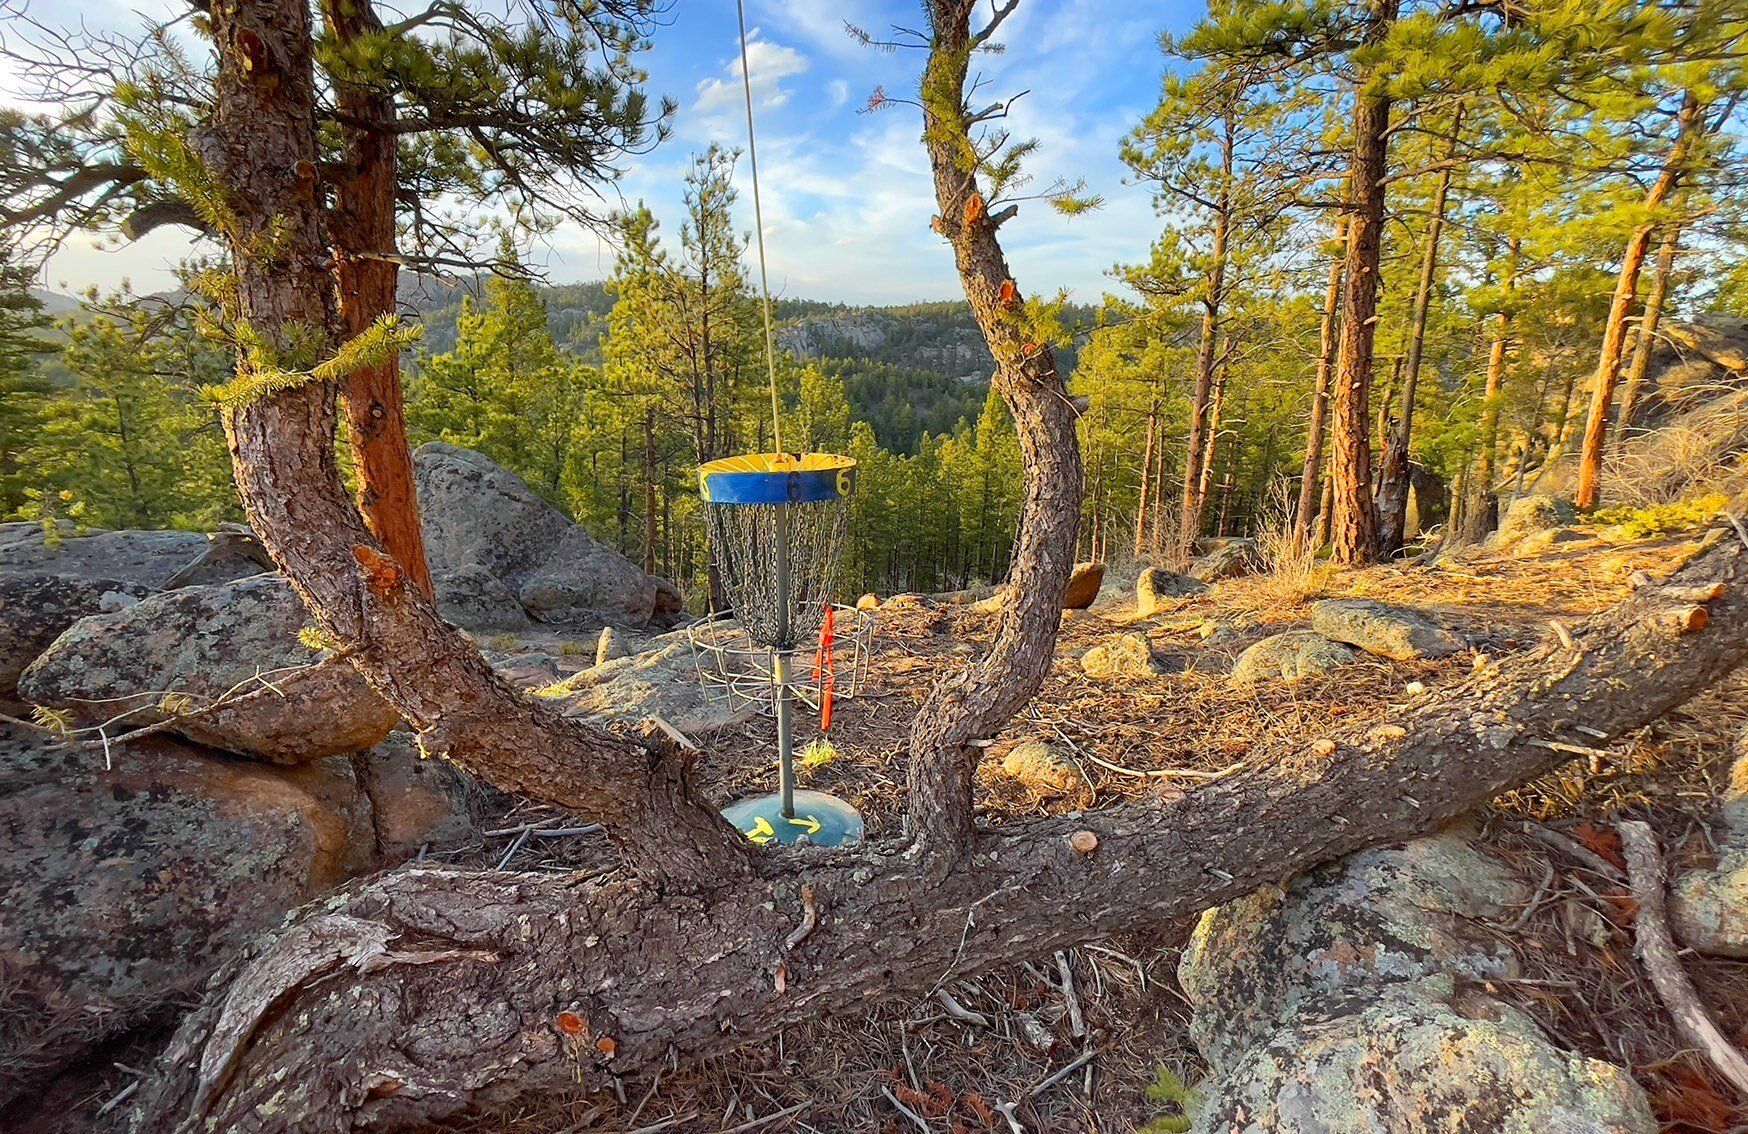 New disc golf hole 13 basket at Sundance Trail Guest Ranch May 2022